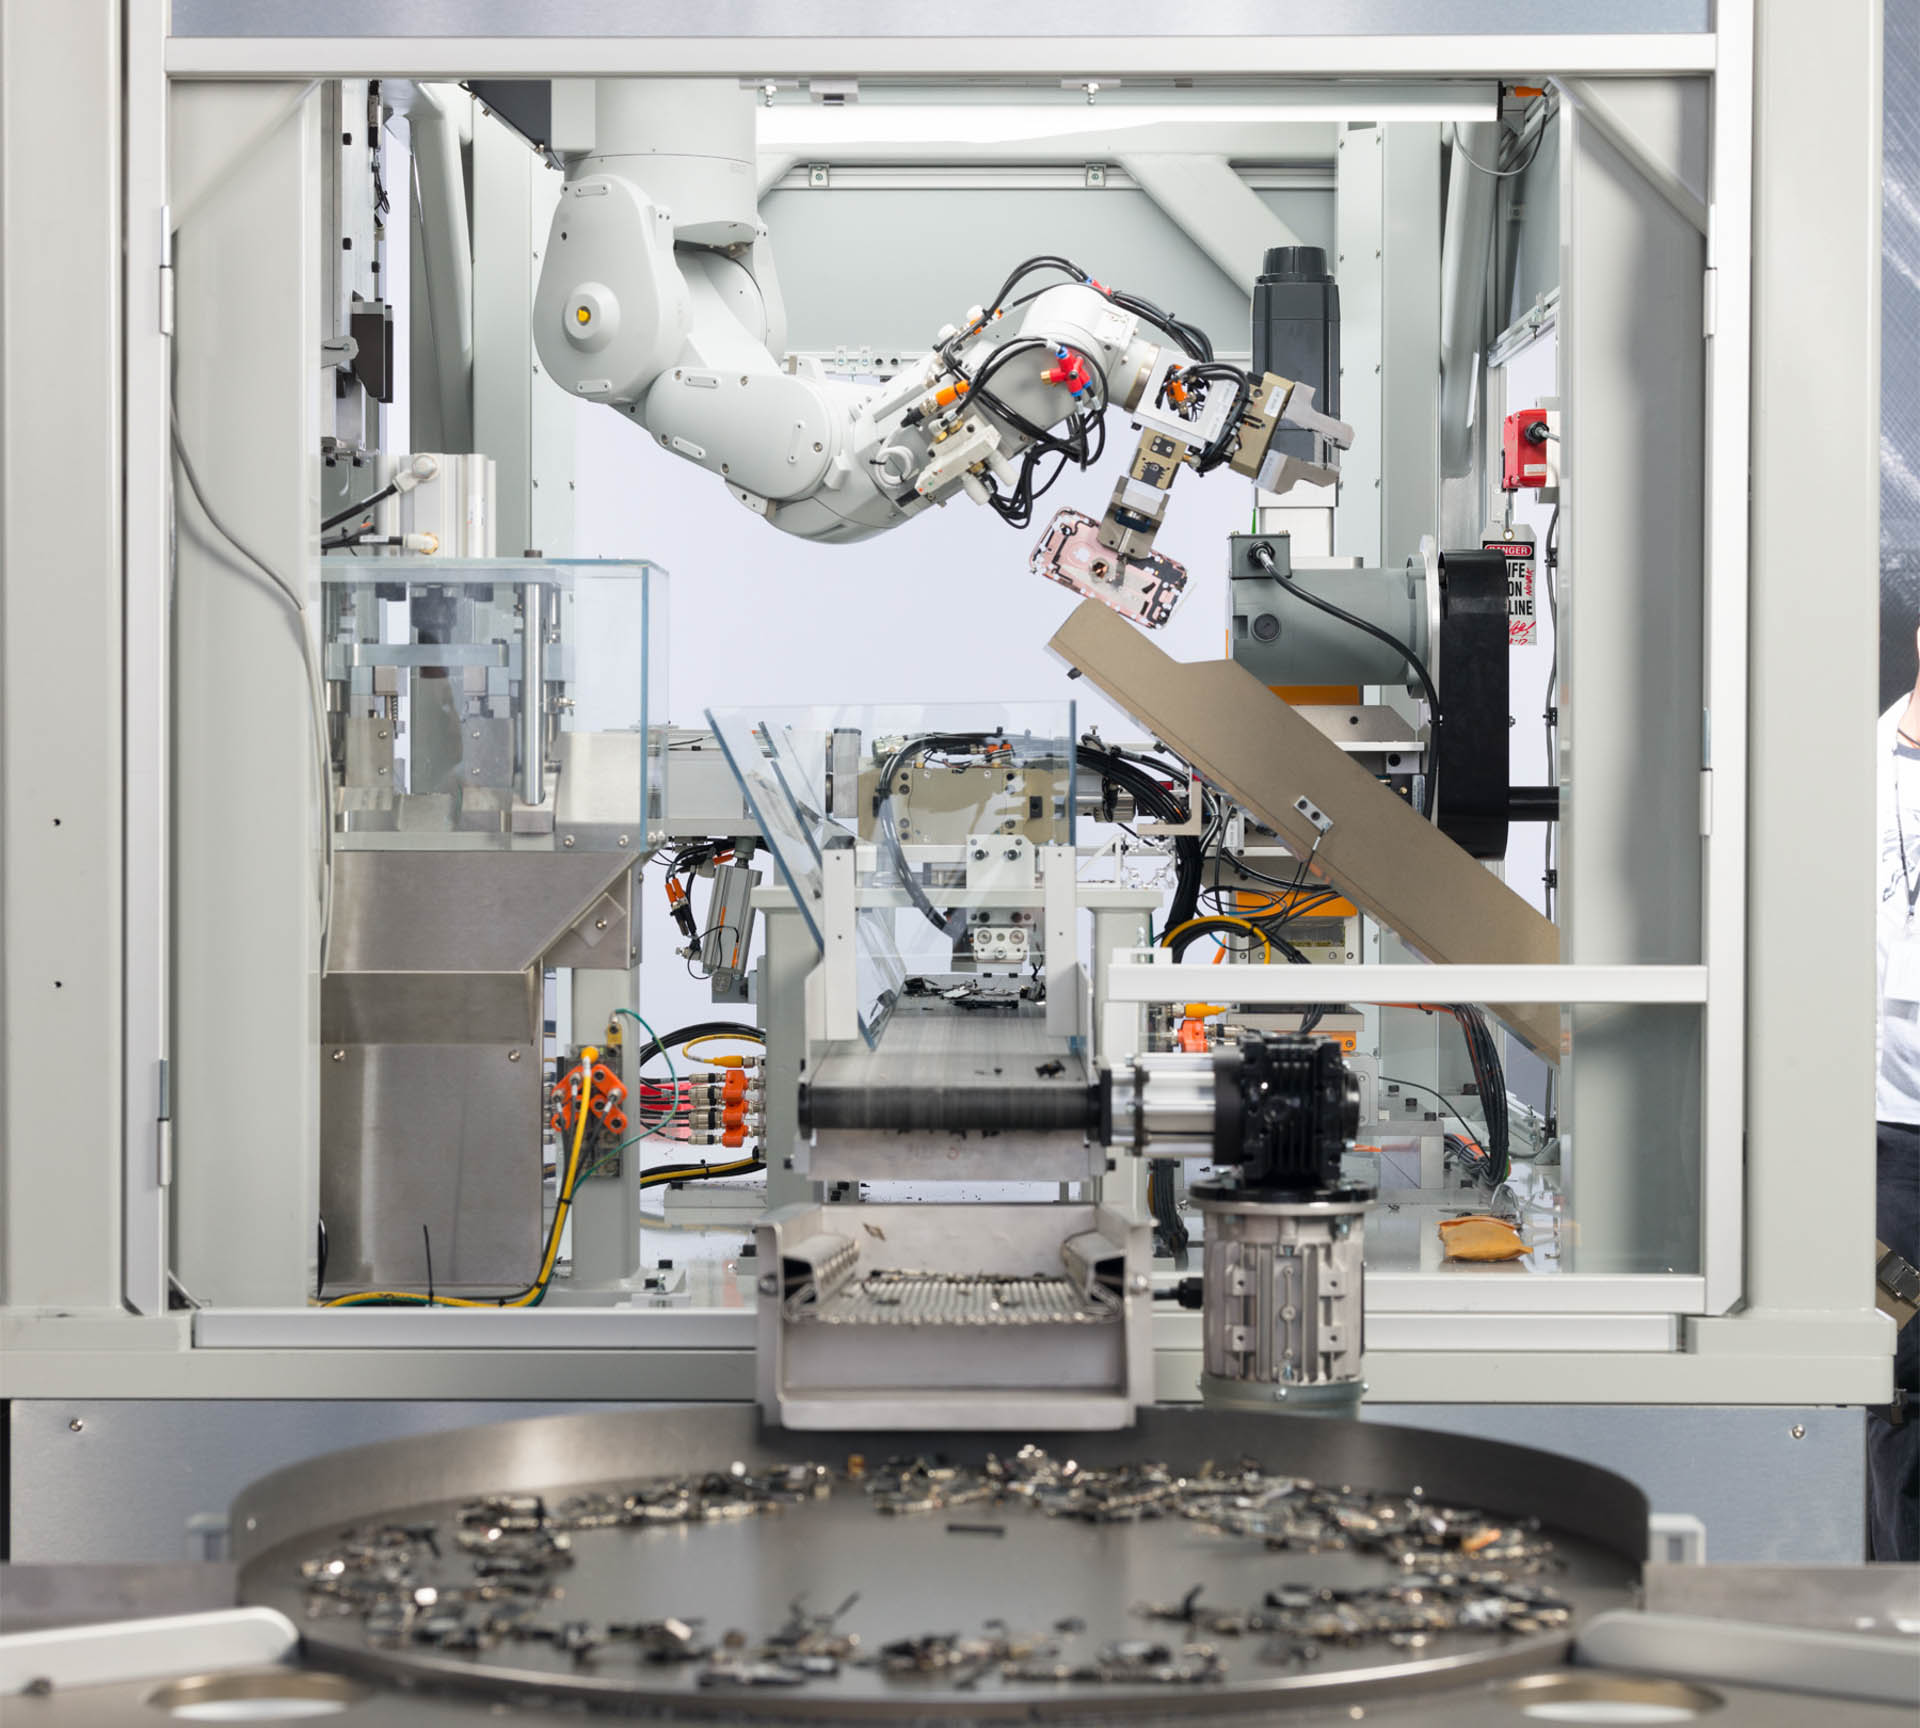 The Daisy recycling robot at Apple. Image: Apple.